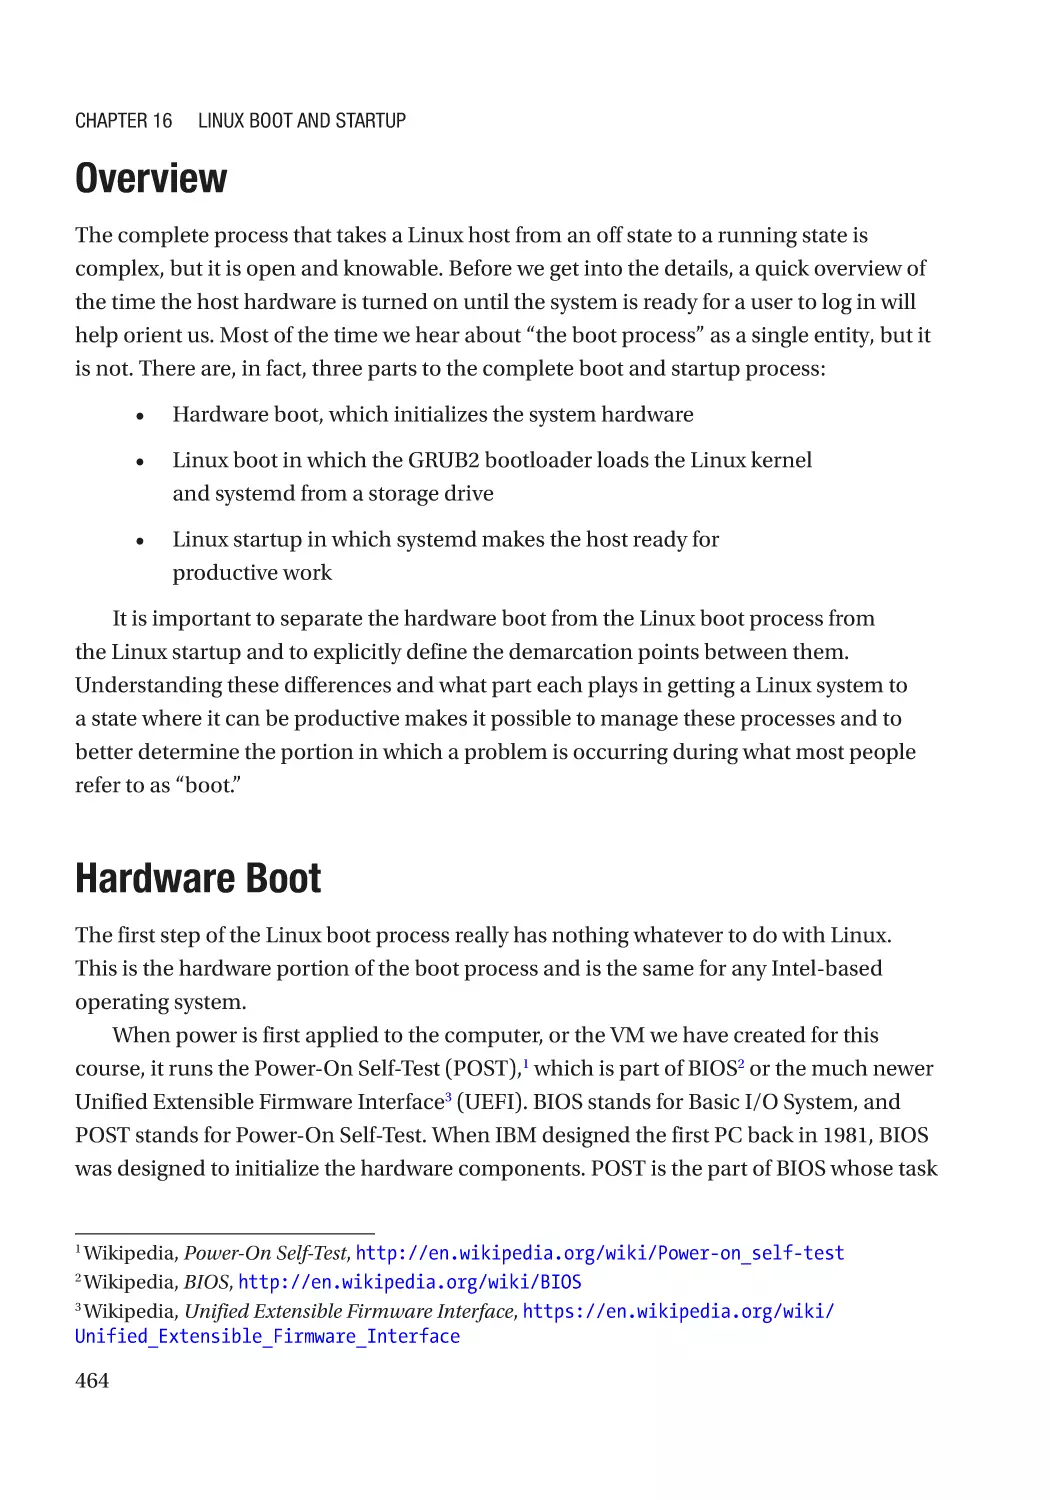 Overview
Hardware Boot